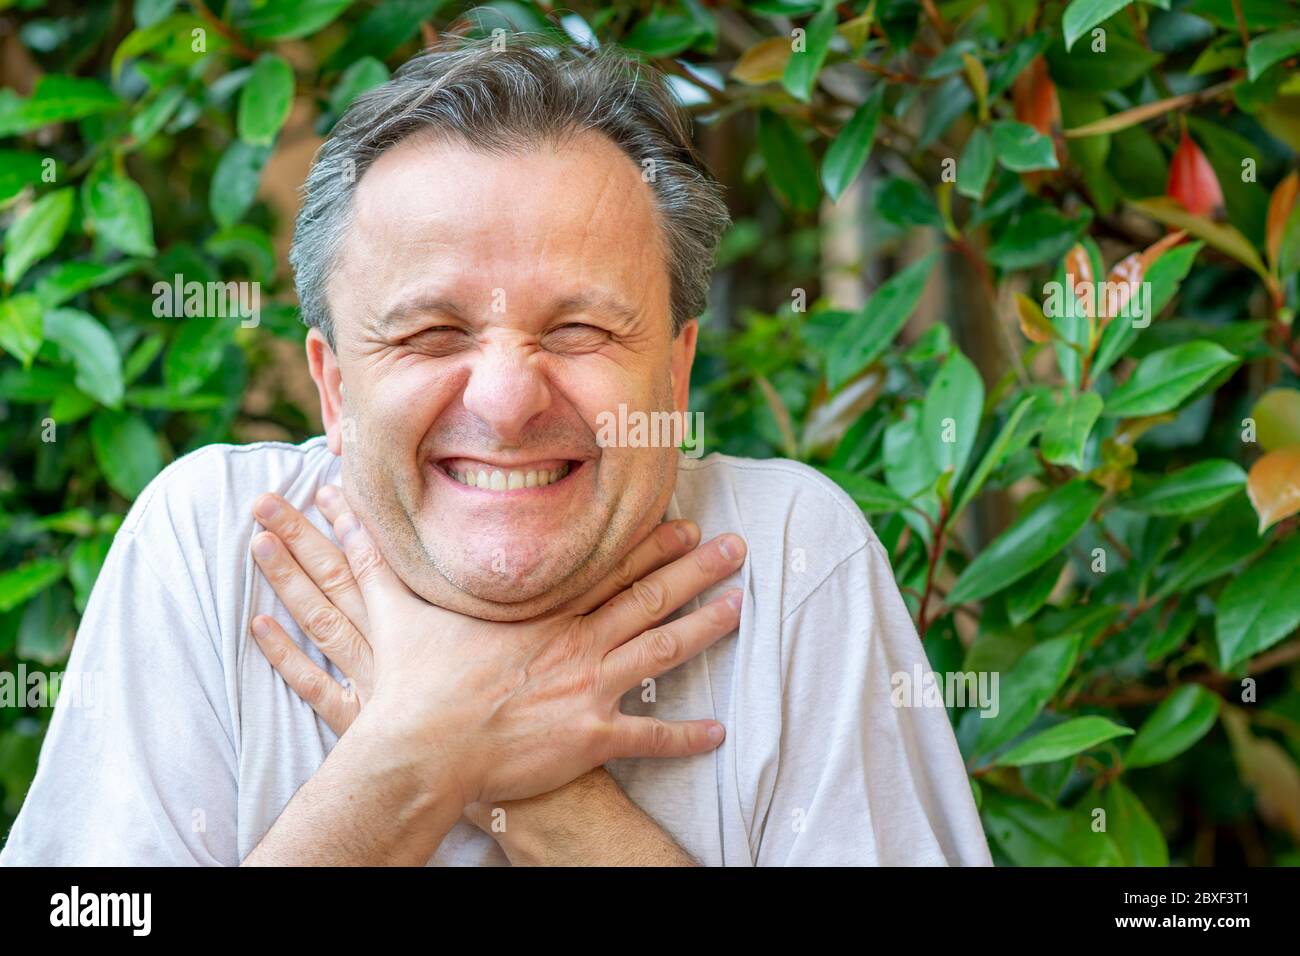 A white man makes a funny face while clutching his neck with his hands as if he wanted to choke Stock Photo